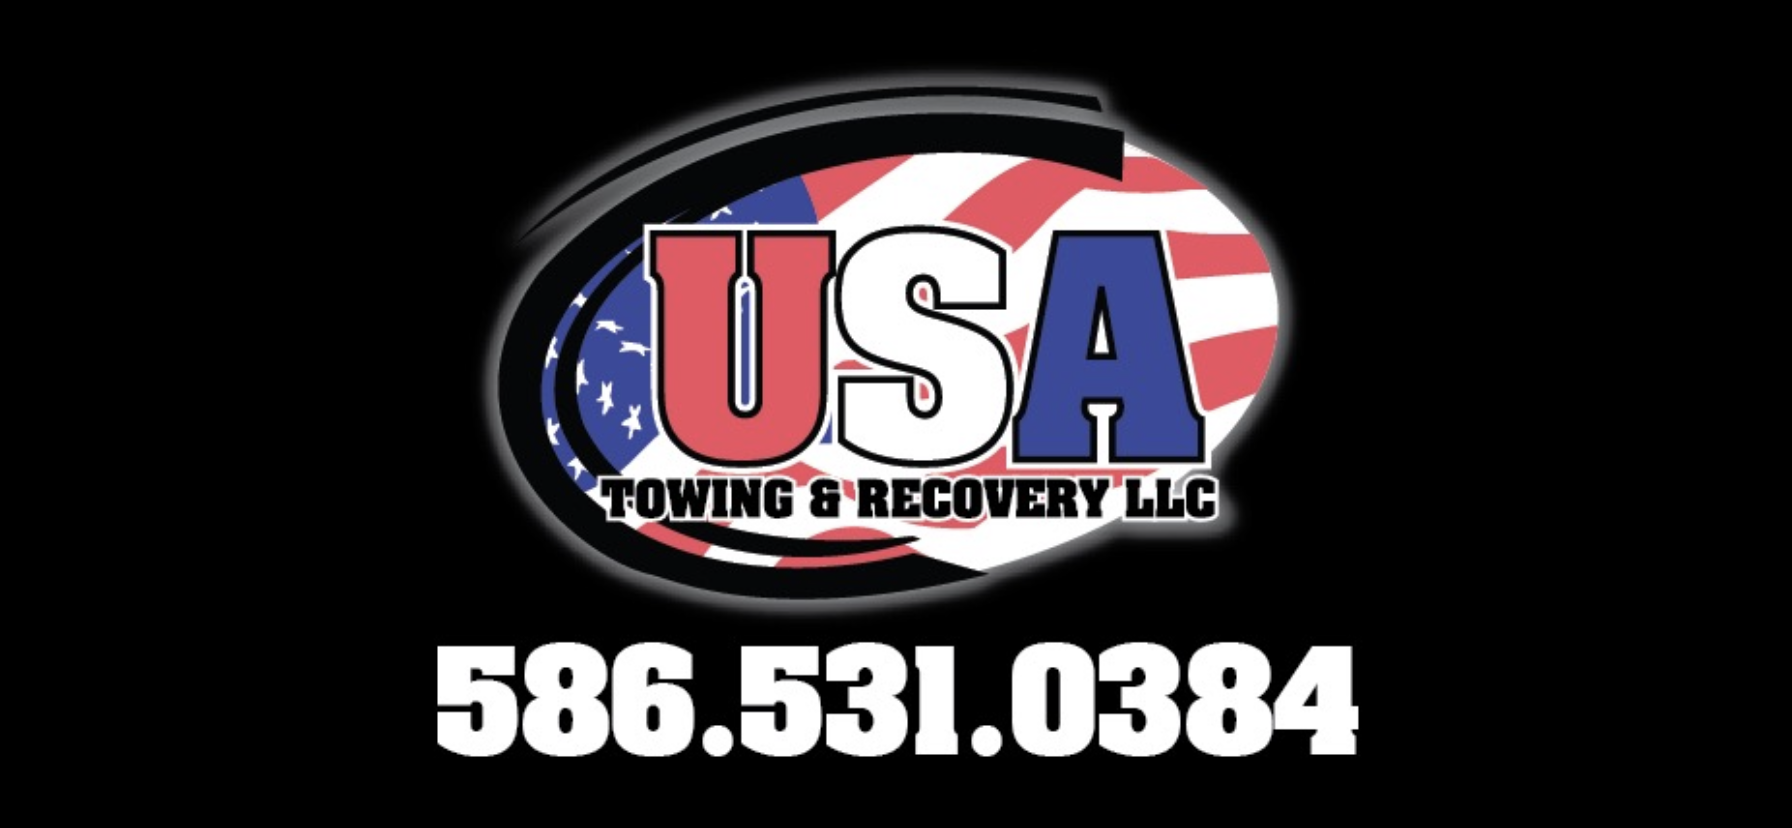 USA Towing & Recovery